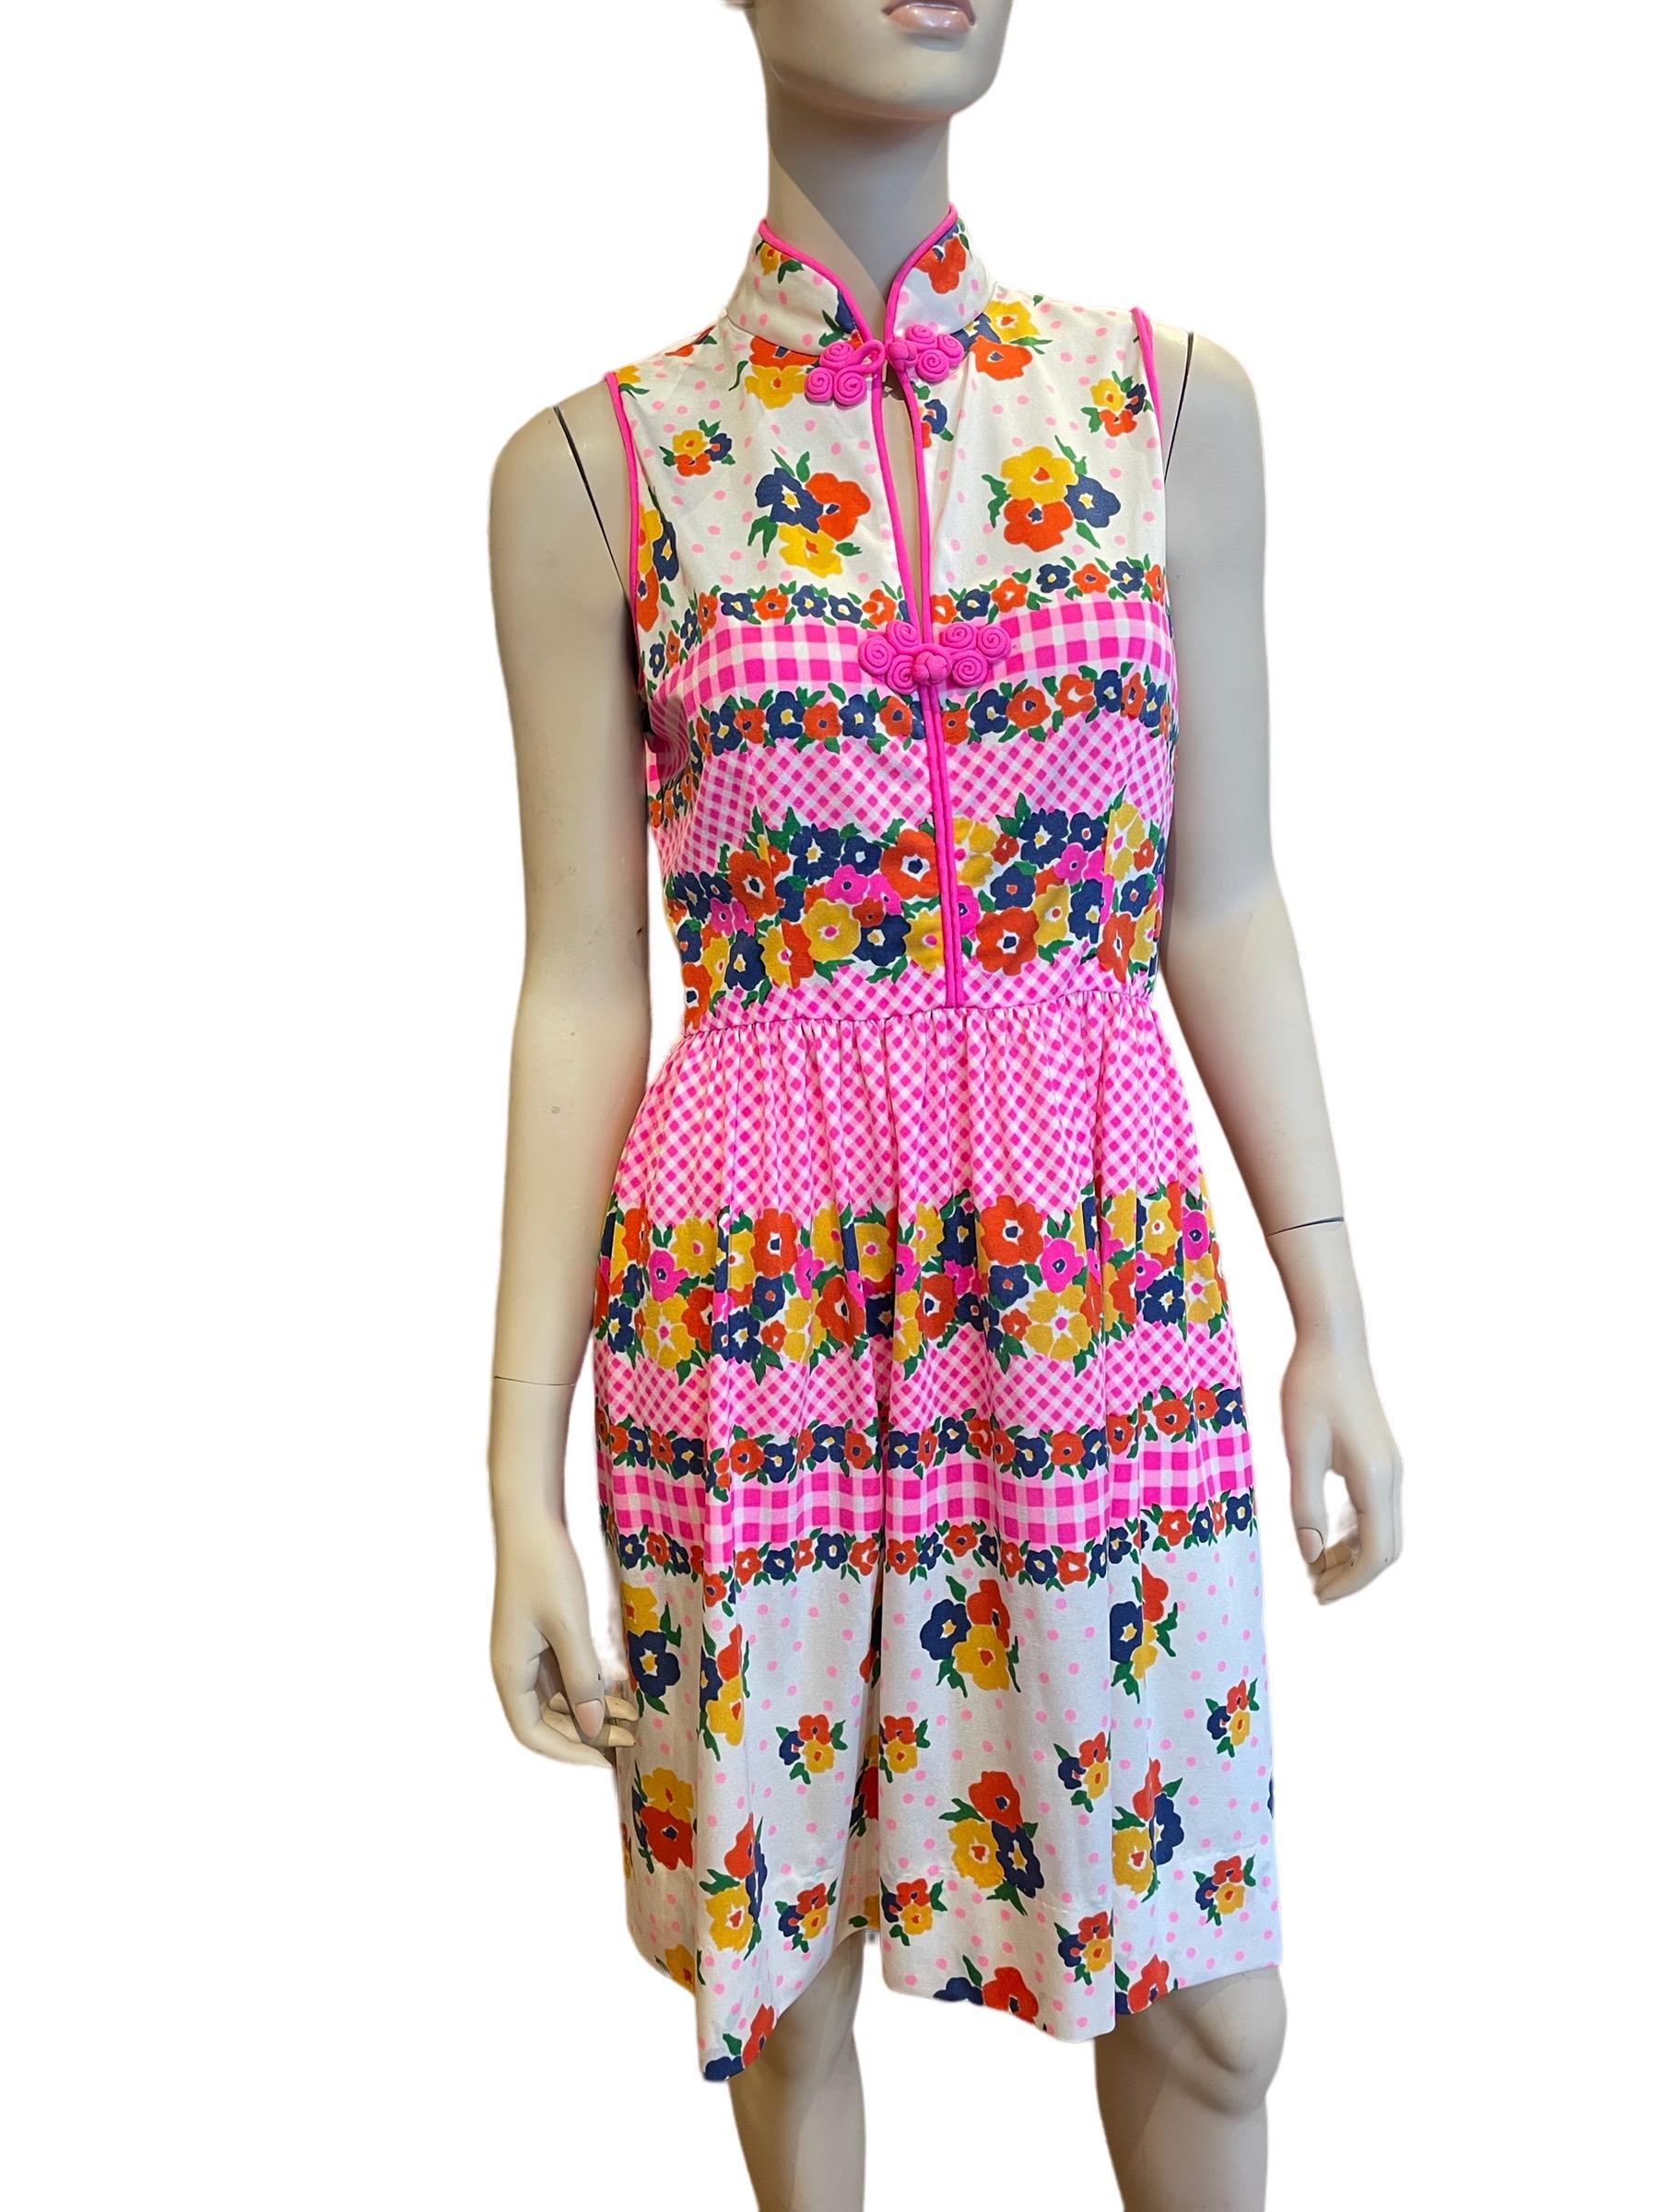 1960s Oscar De La Renta Hot Pink Floral Mandarin Style Sleeveless Dress - Rare designer Vintage piece!

Bust: 36”
Waist: 28”
Length: 38”

Feel free to message us with any questions!